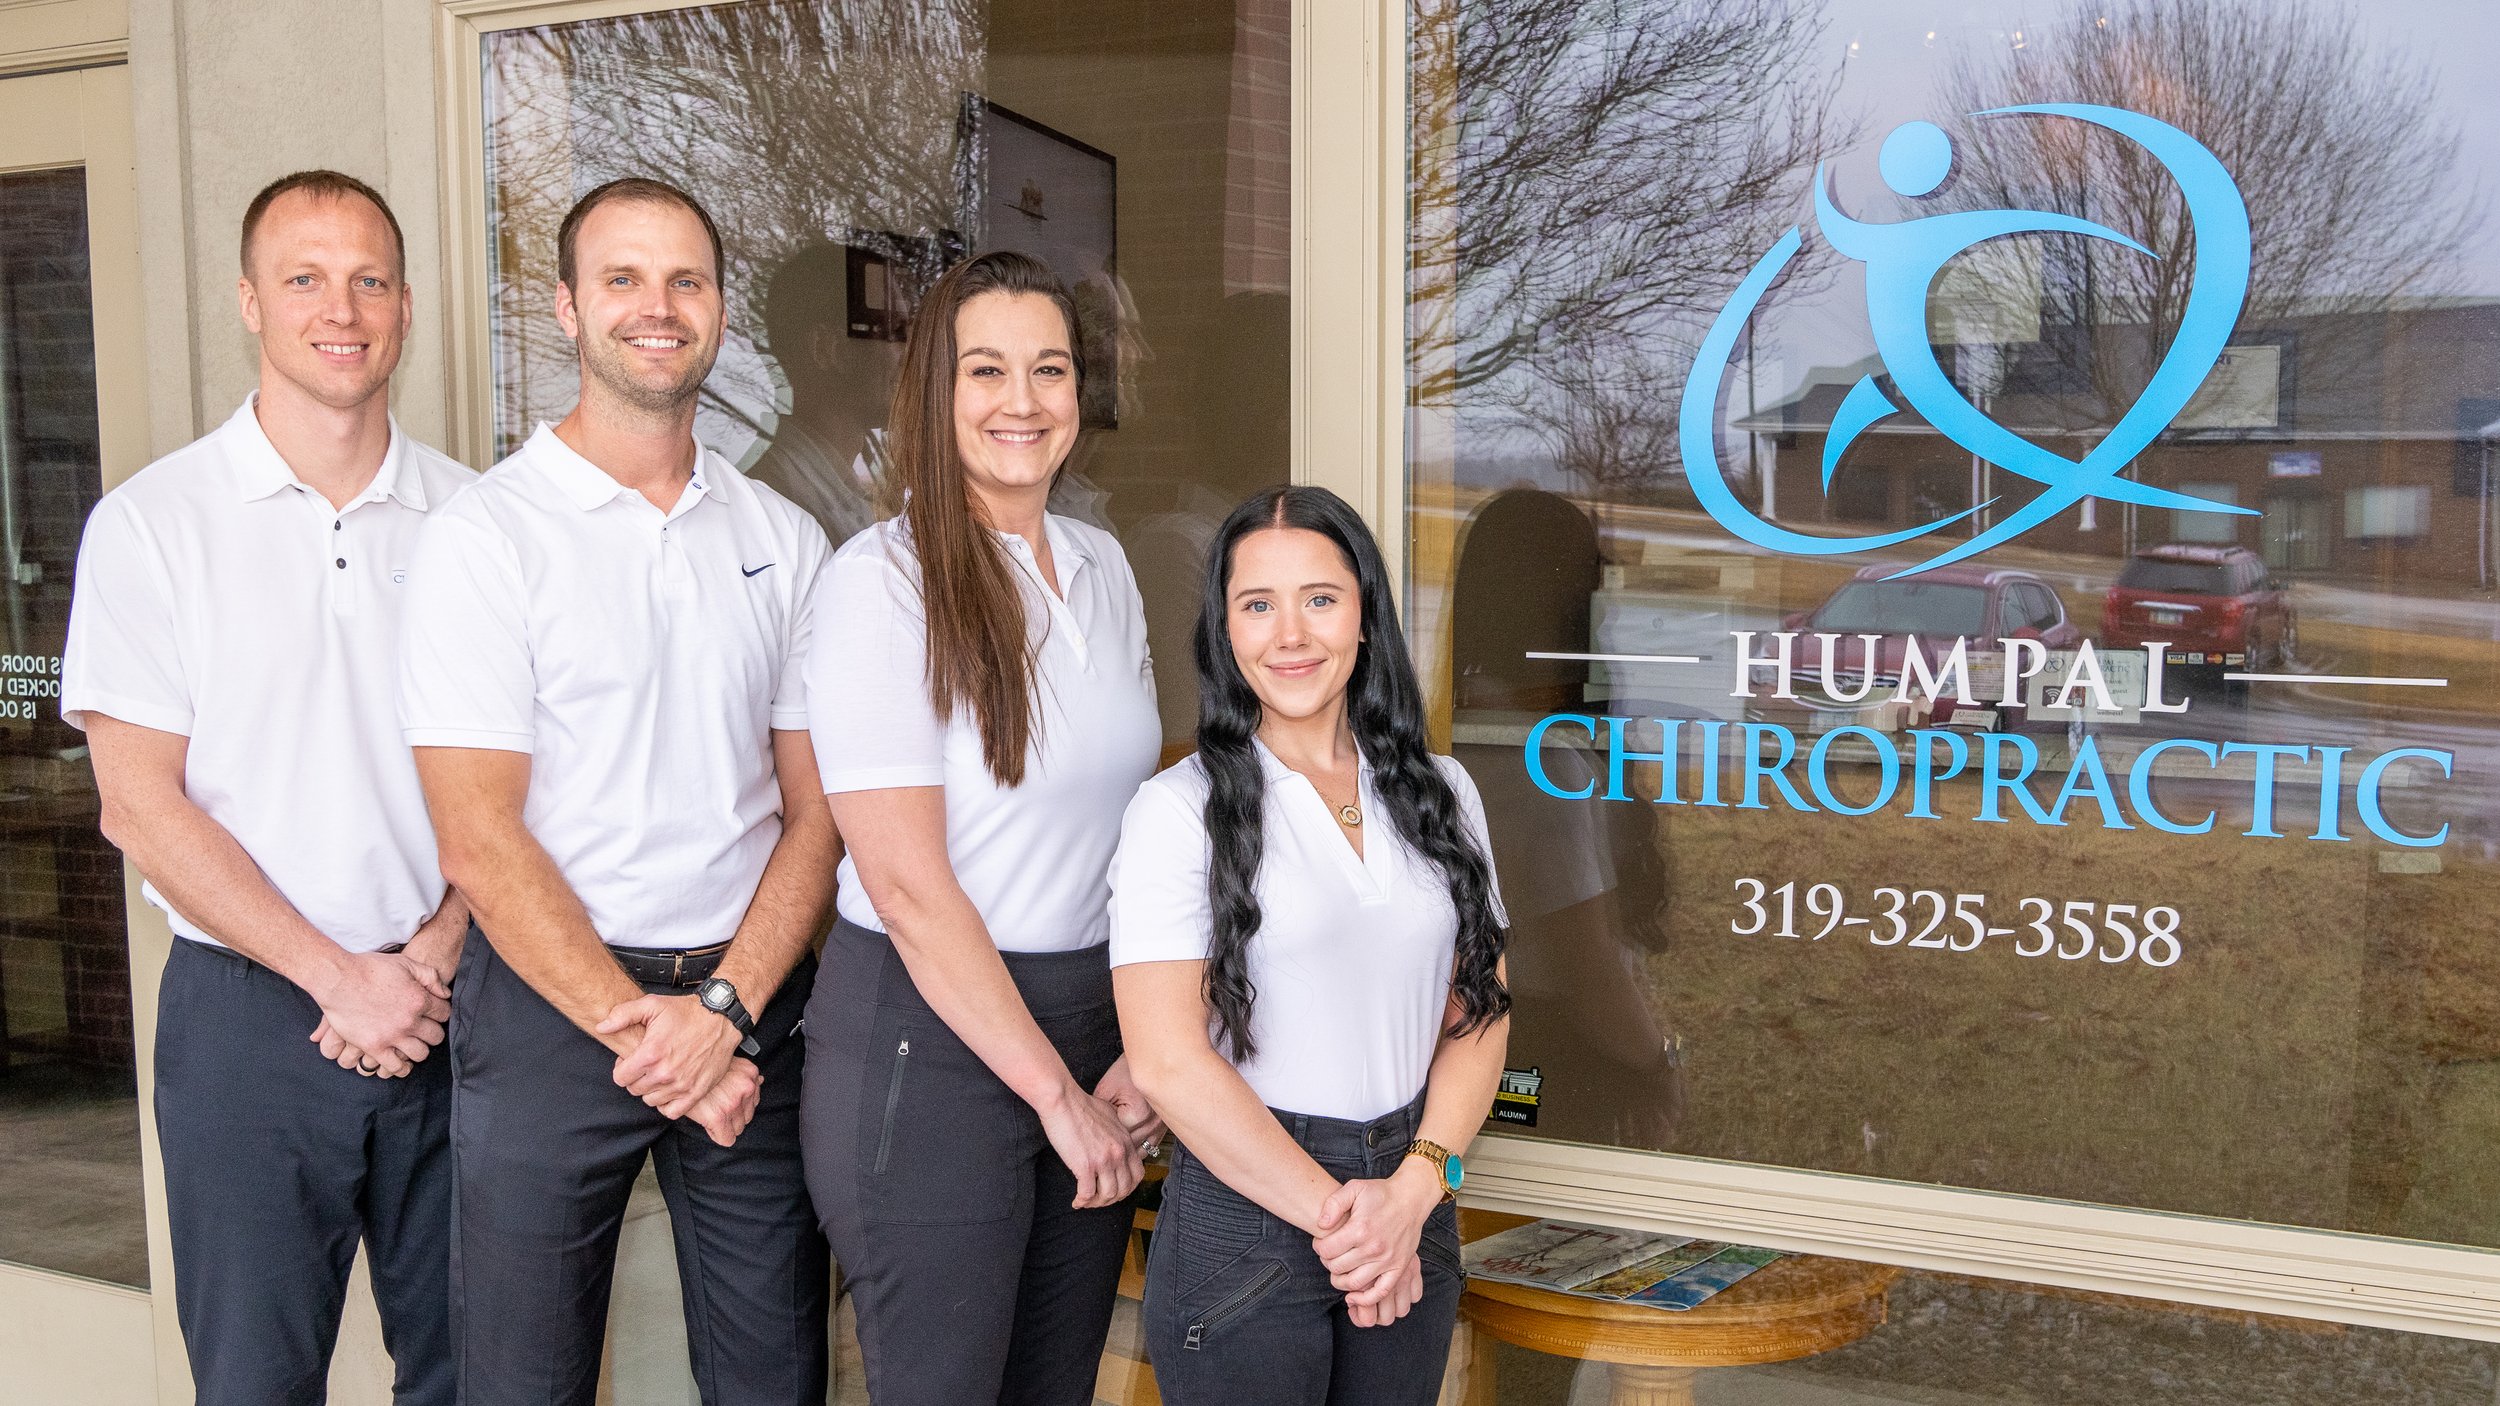 Humpal Chiropractic staff stand in front of the clinic.